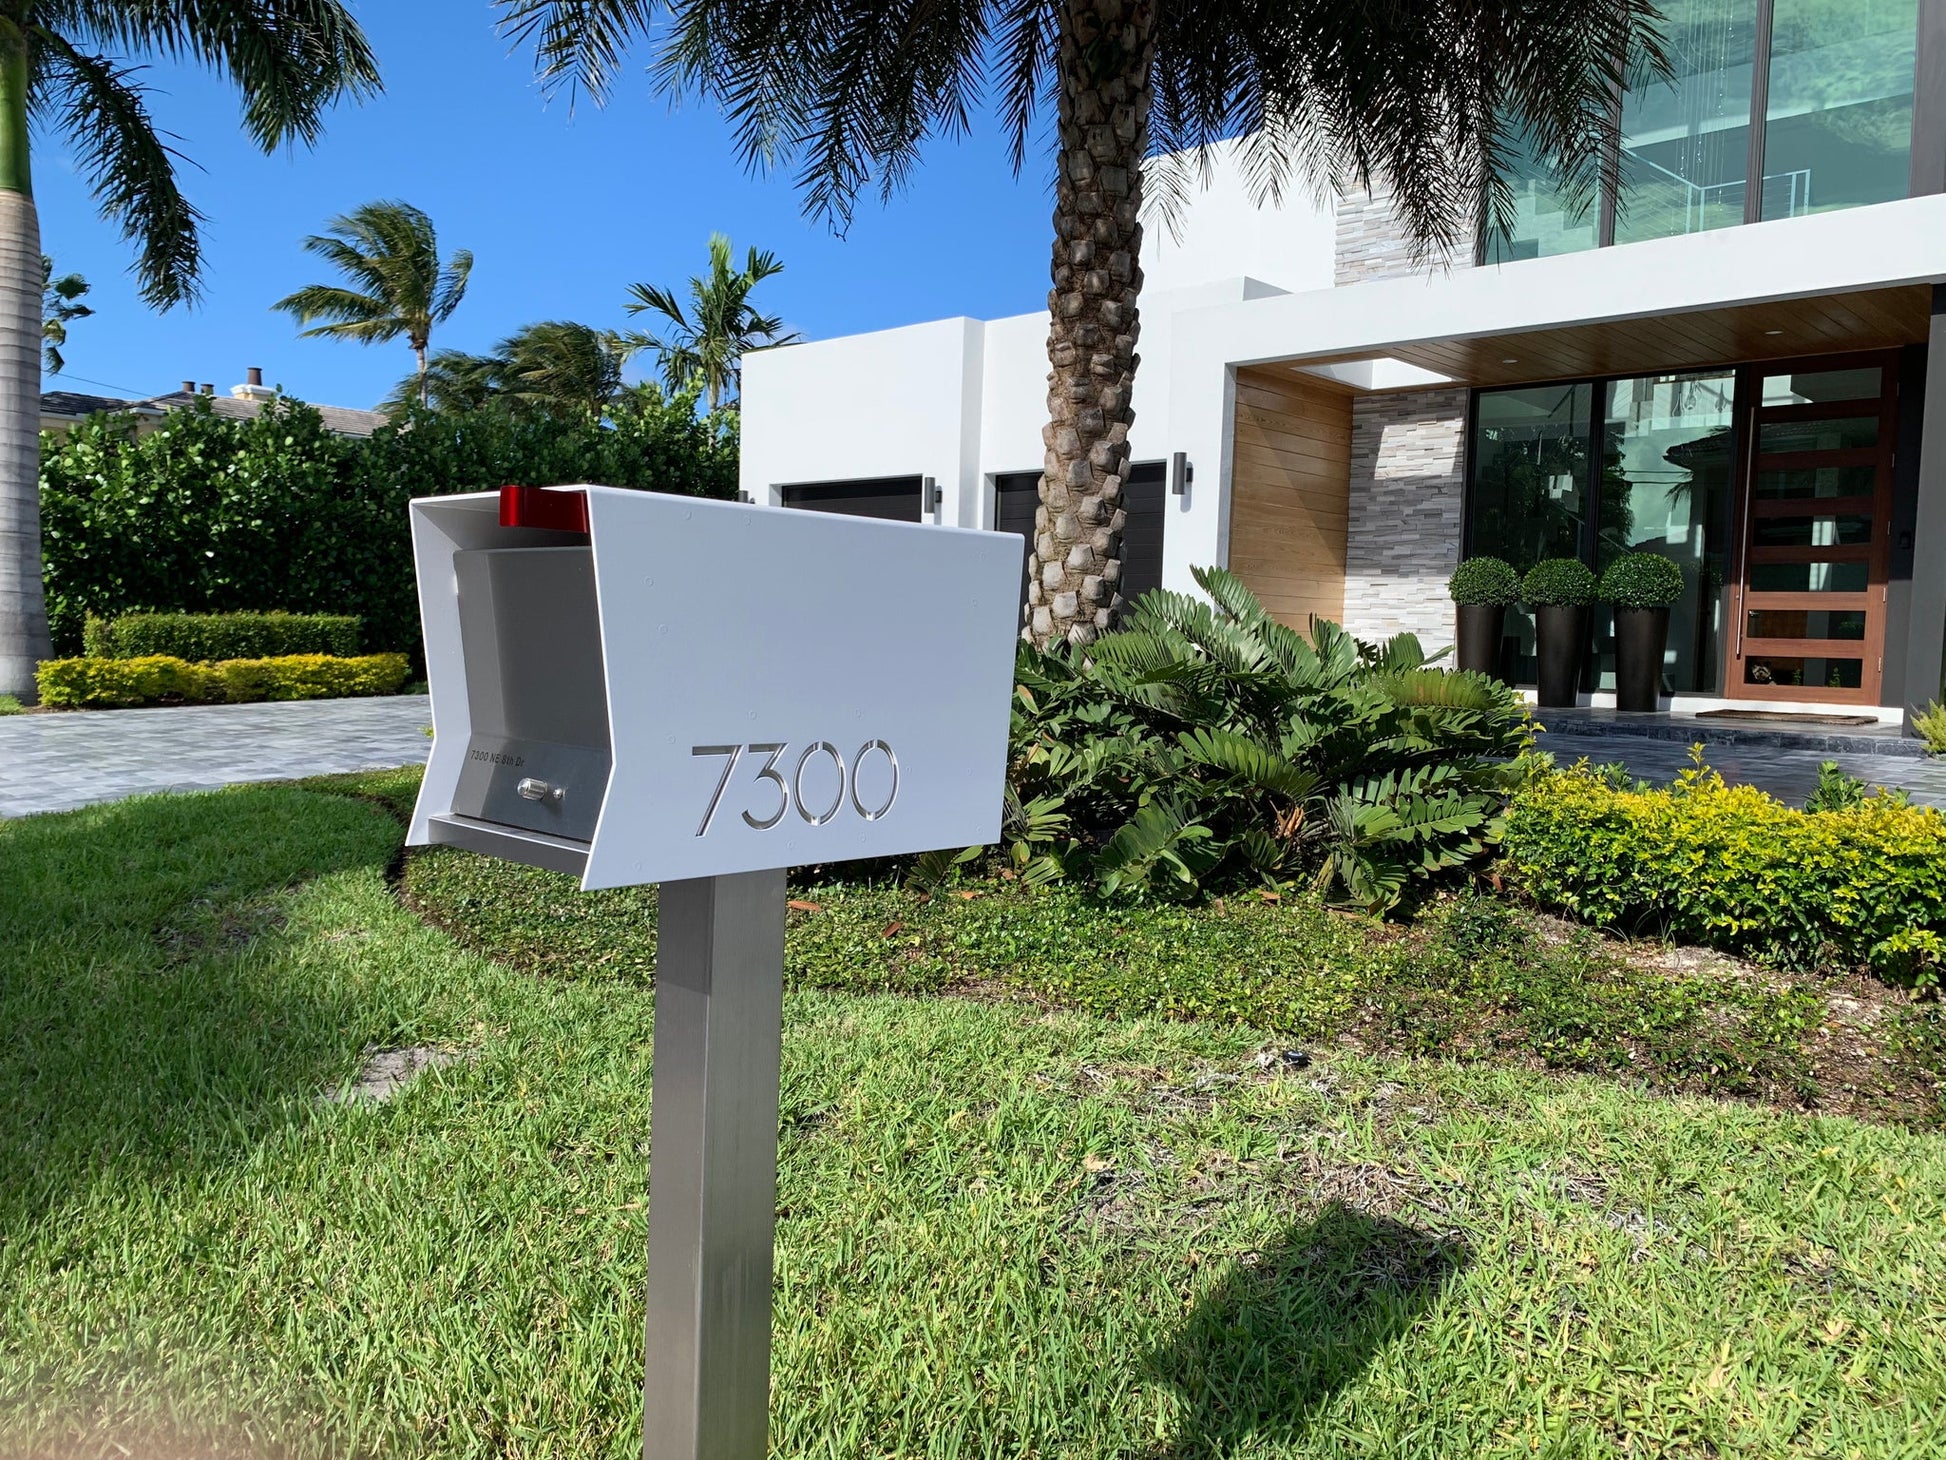 Stainless Steel Mailboxes